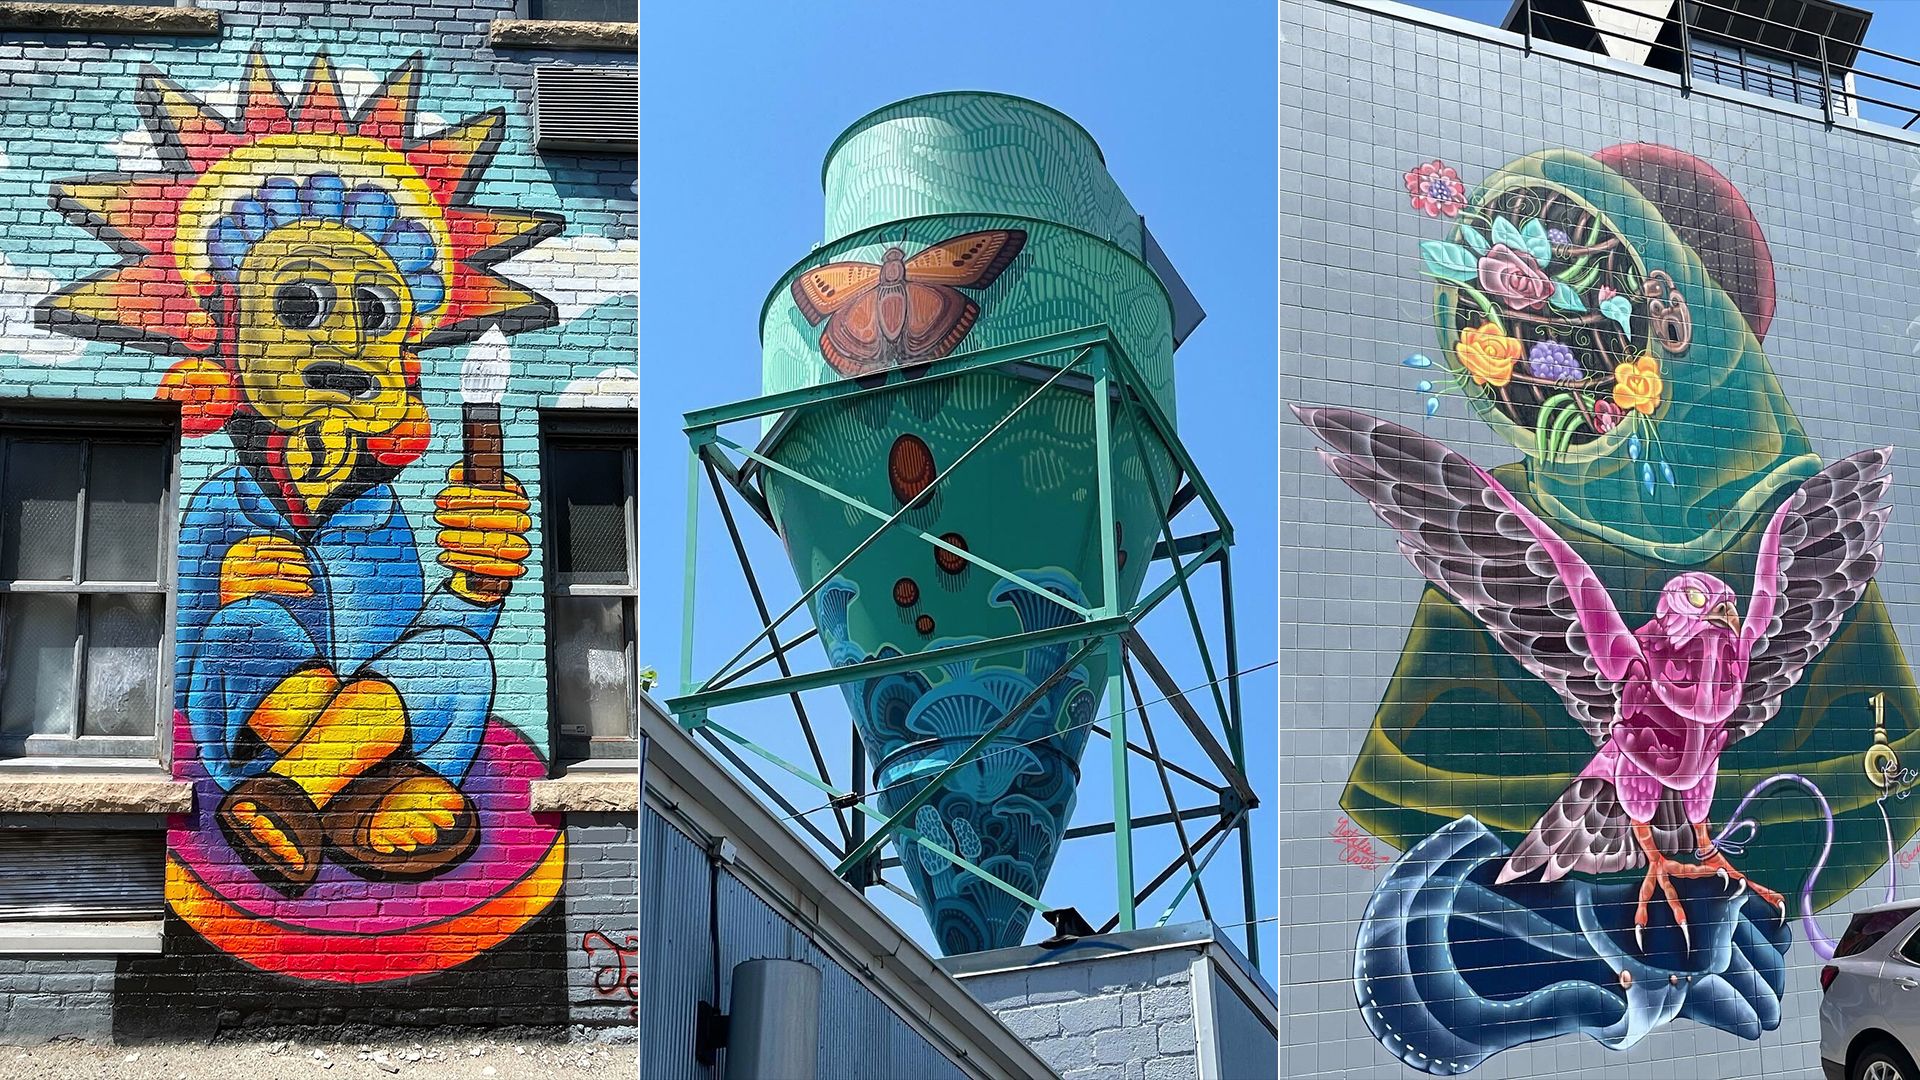 Murals on two streets and a smoke stack.